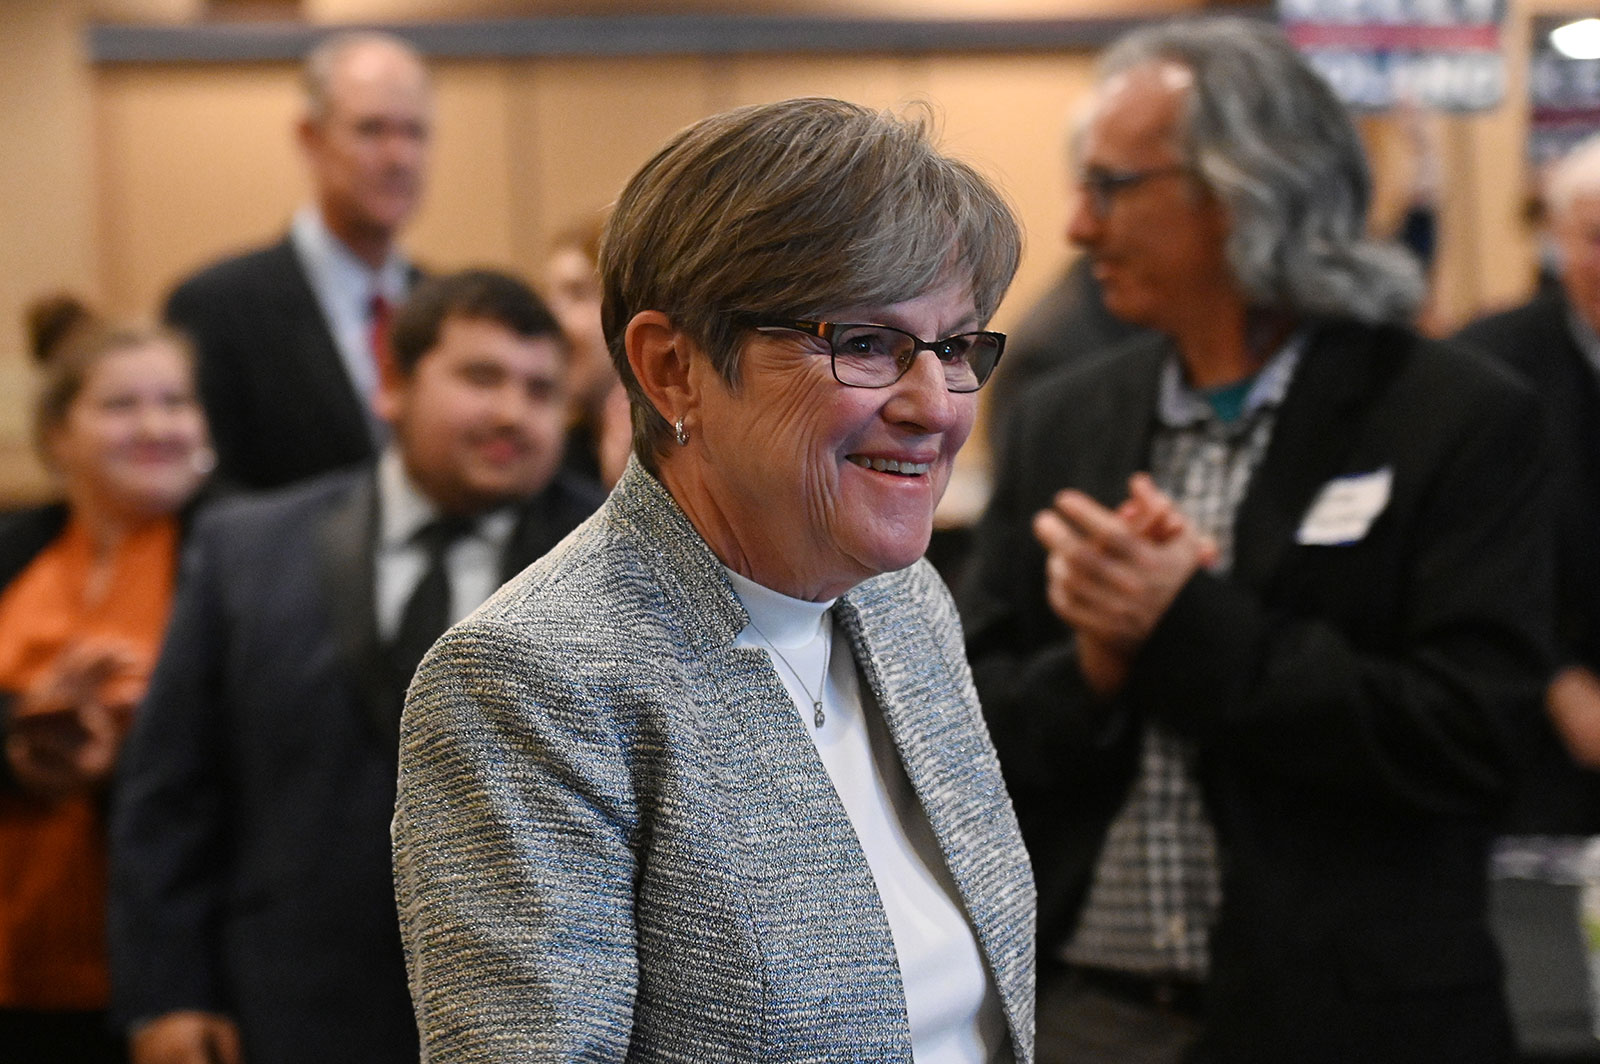 Gov. Laura Kelly arrives to address supporters at her election night party in Topeka, Kansas, on Tuesday.